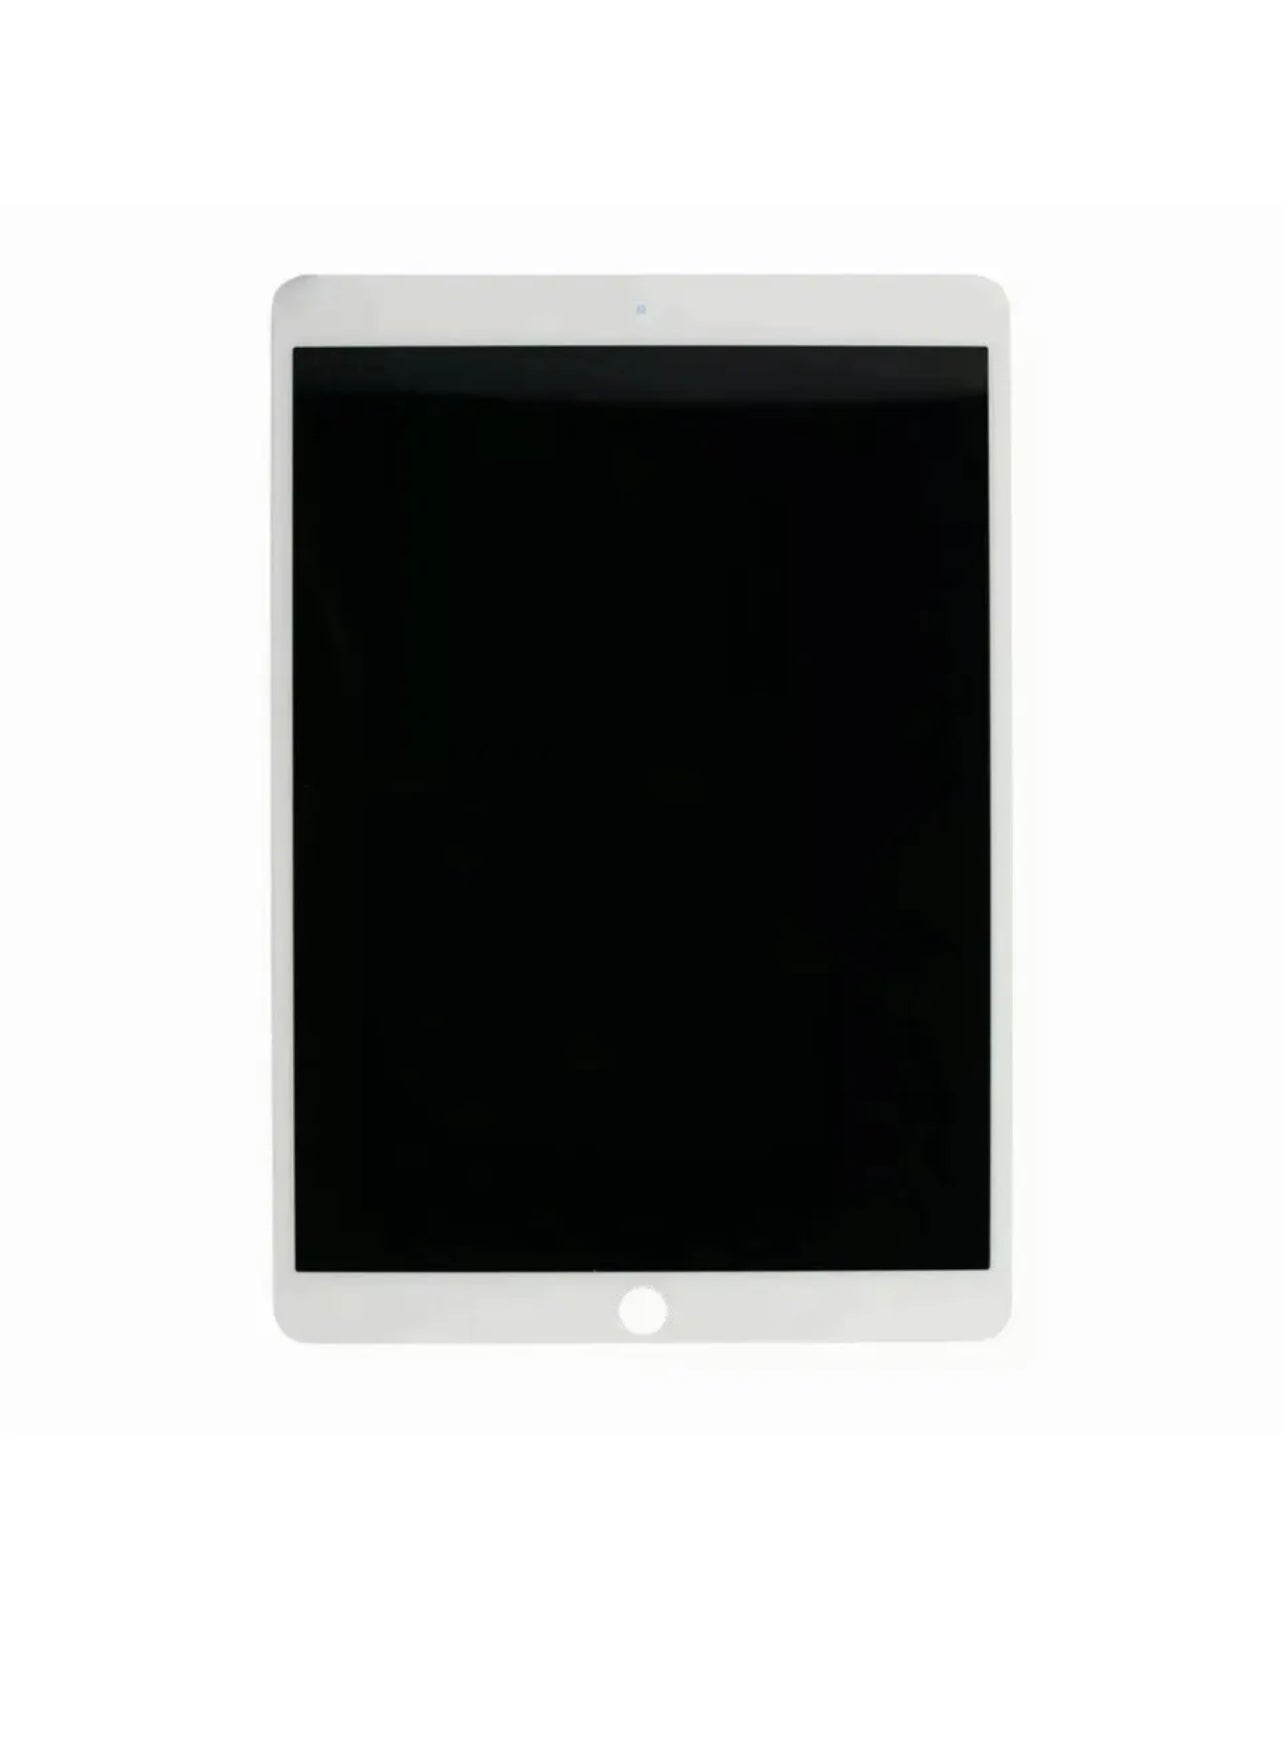 iPad Mini 4  Mini (2015) Lcd Screen Display Touch High Quality Replacement A1538 A1550